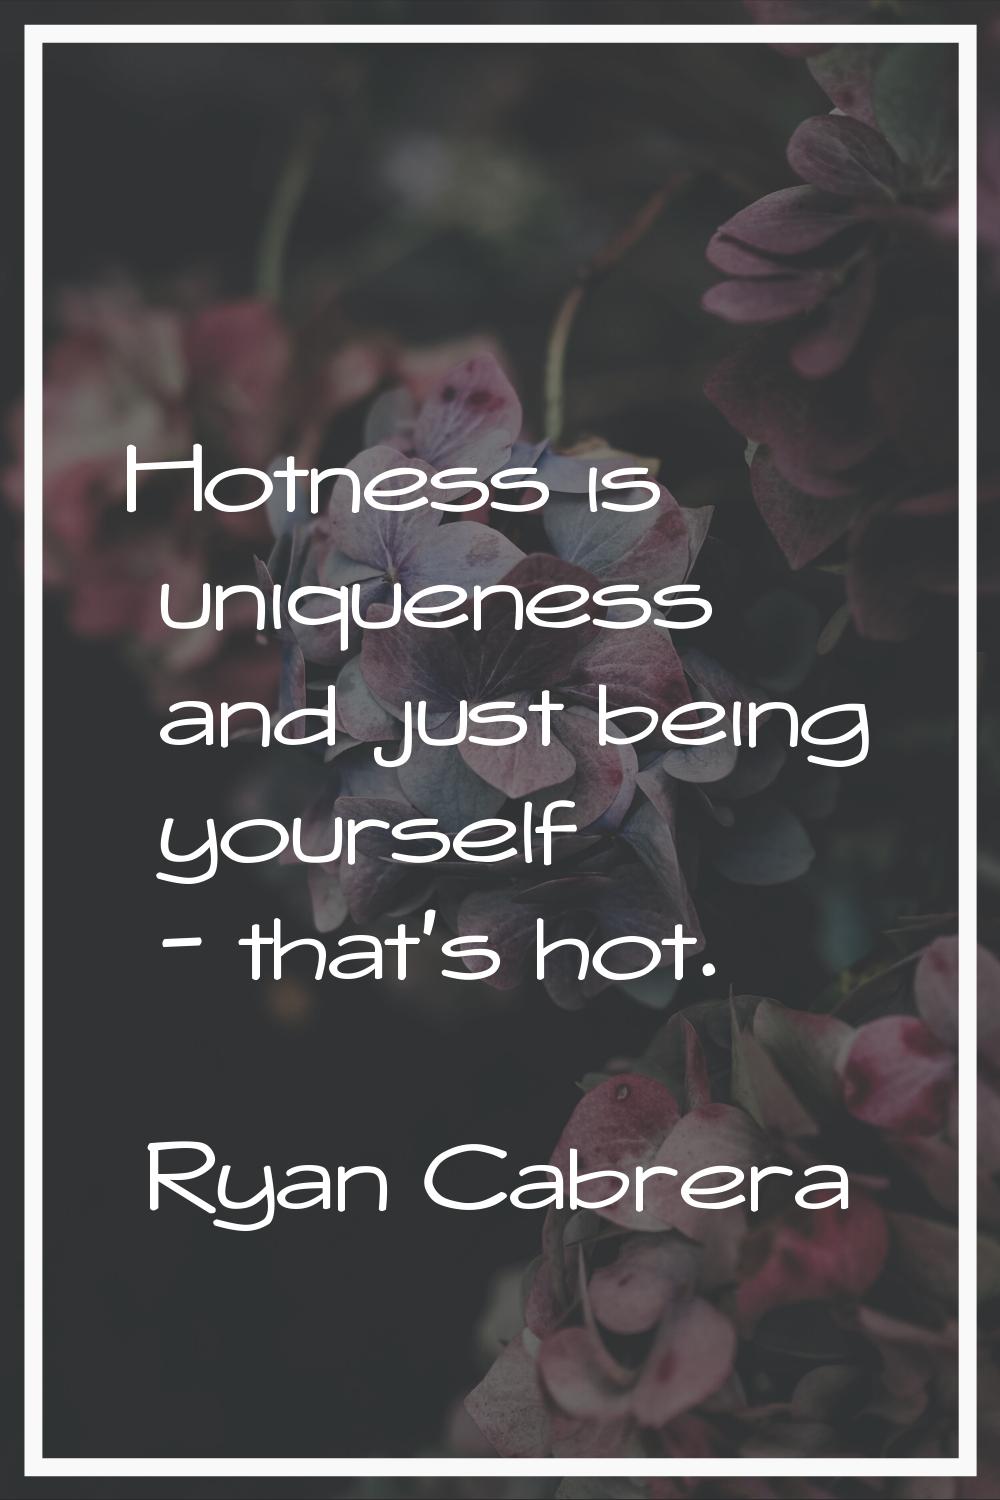 Hotness is uniqueness and just being yourself - that's hot.